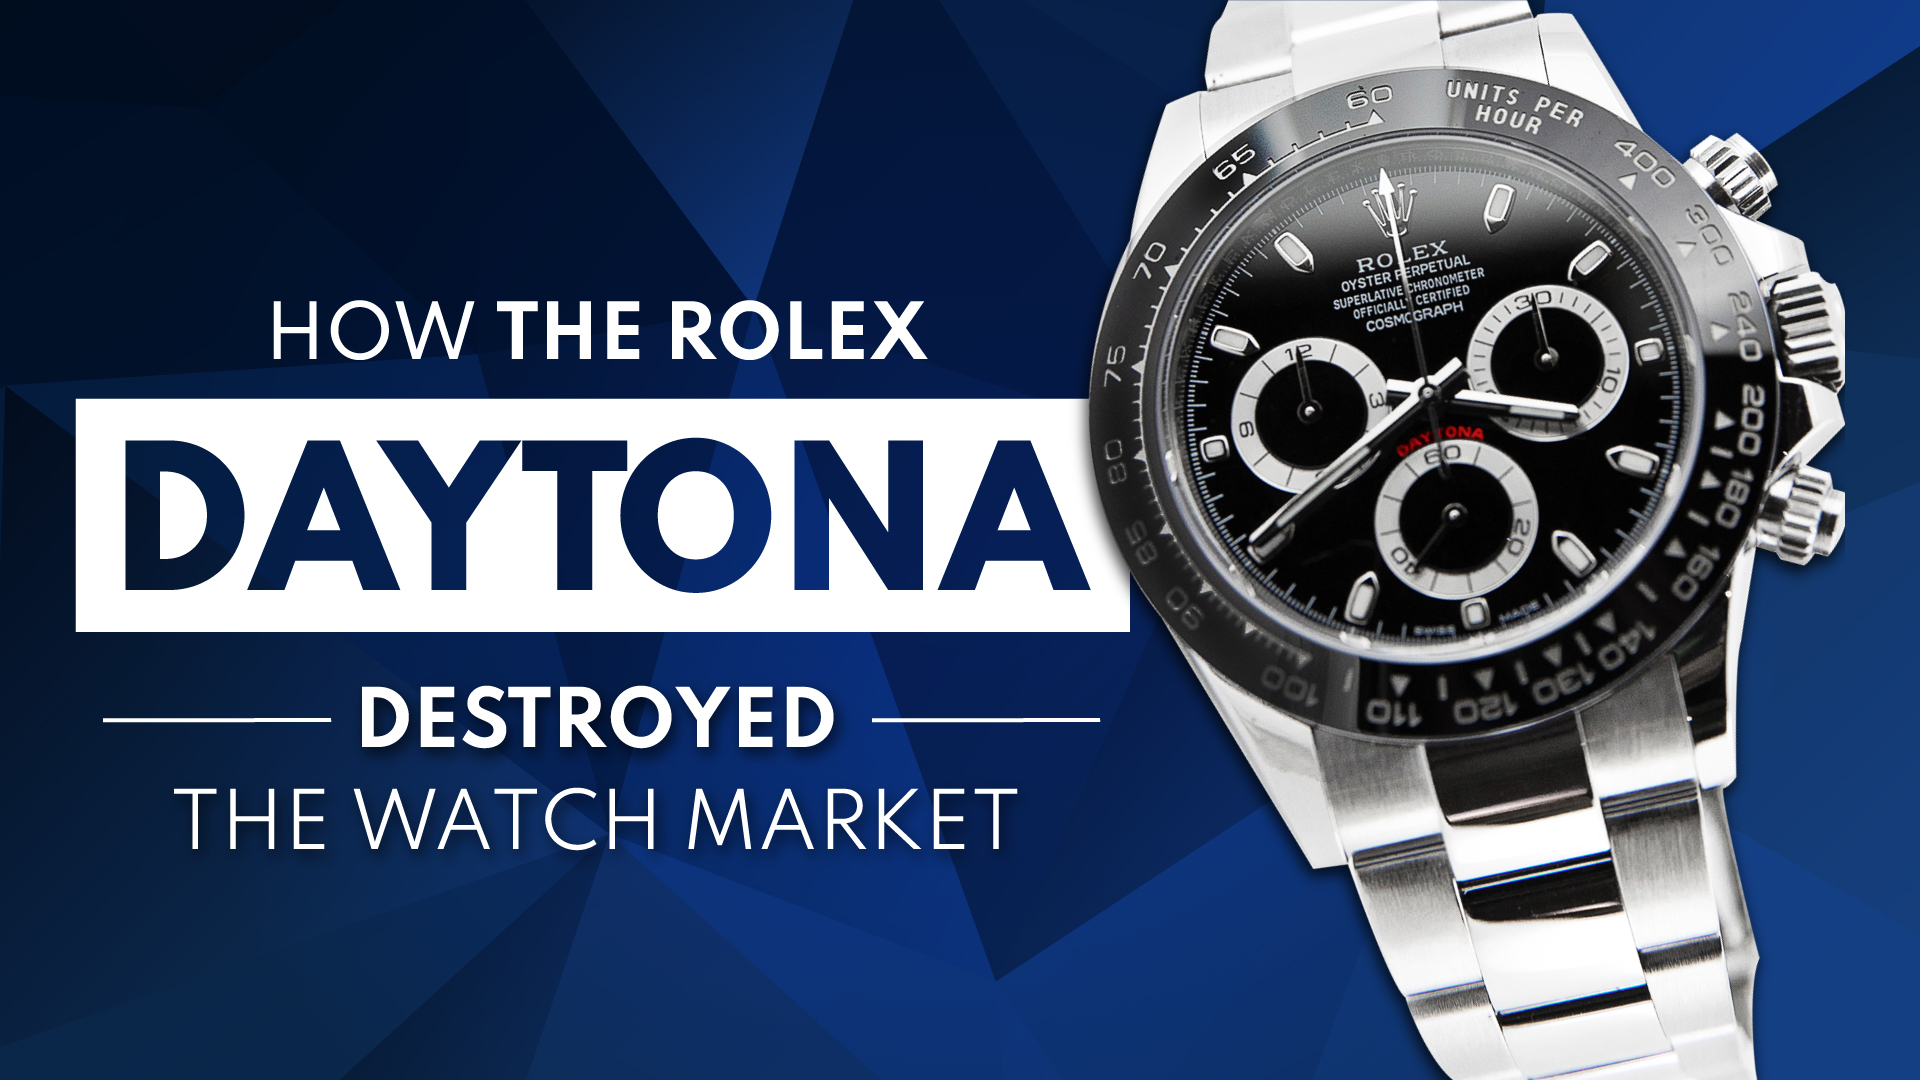 How the Rolex Daytona destroyed the watch market